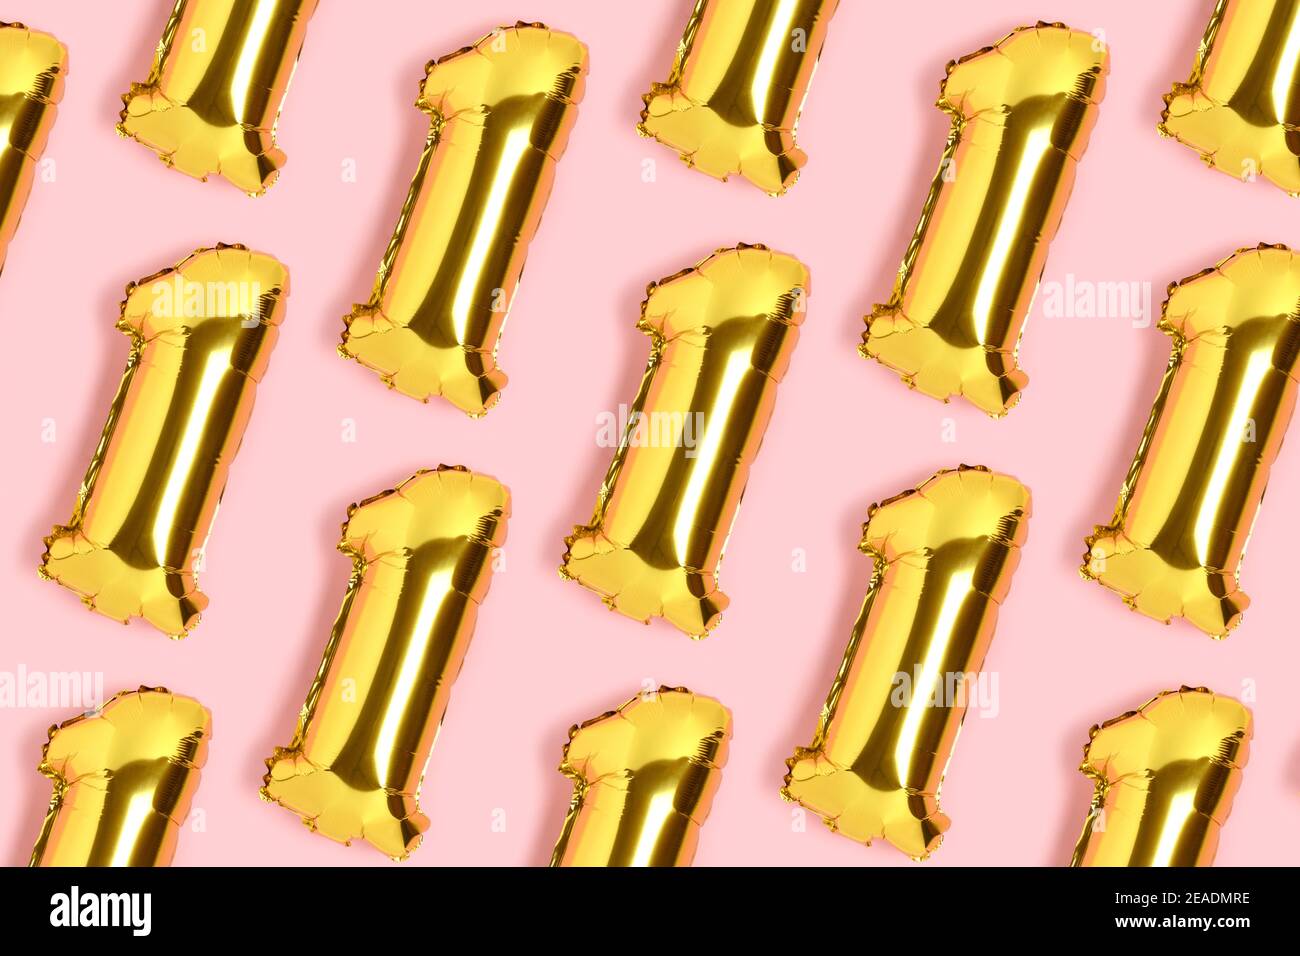 Number 1 golden balloons pattern. One year anniversary celebration concept on a pink background. Stock Photo